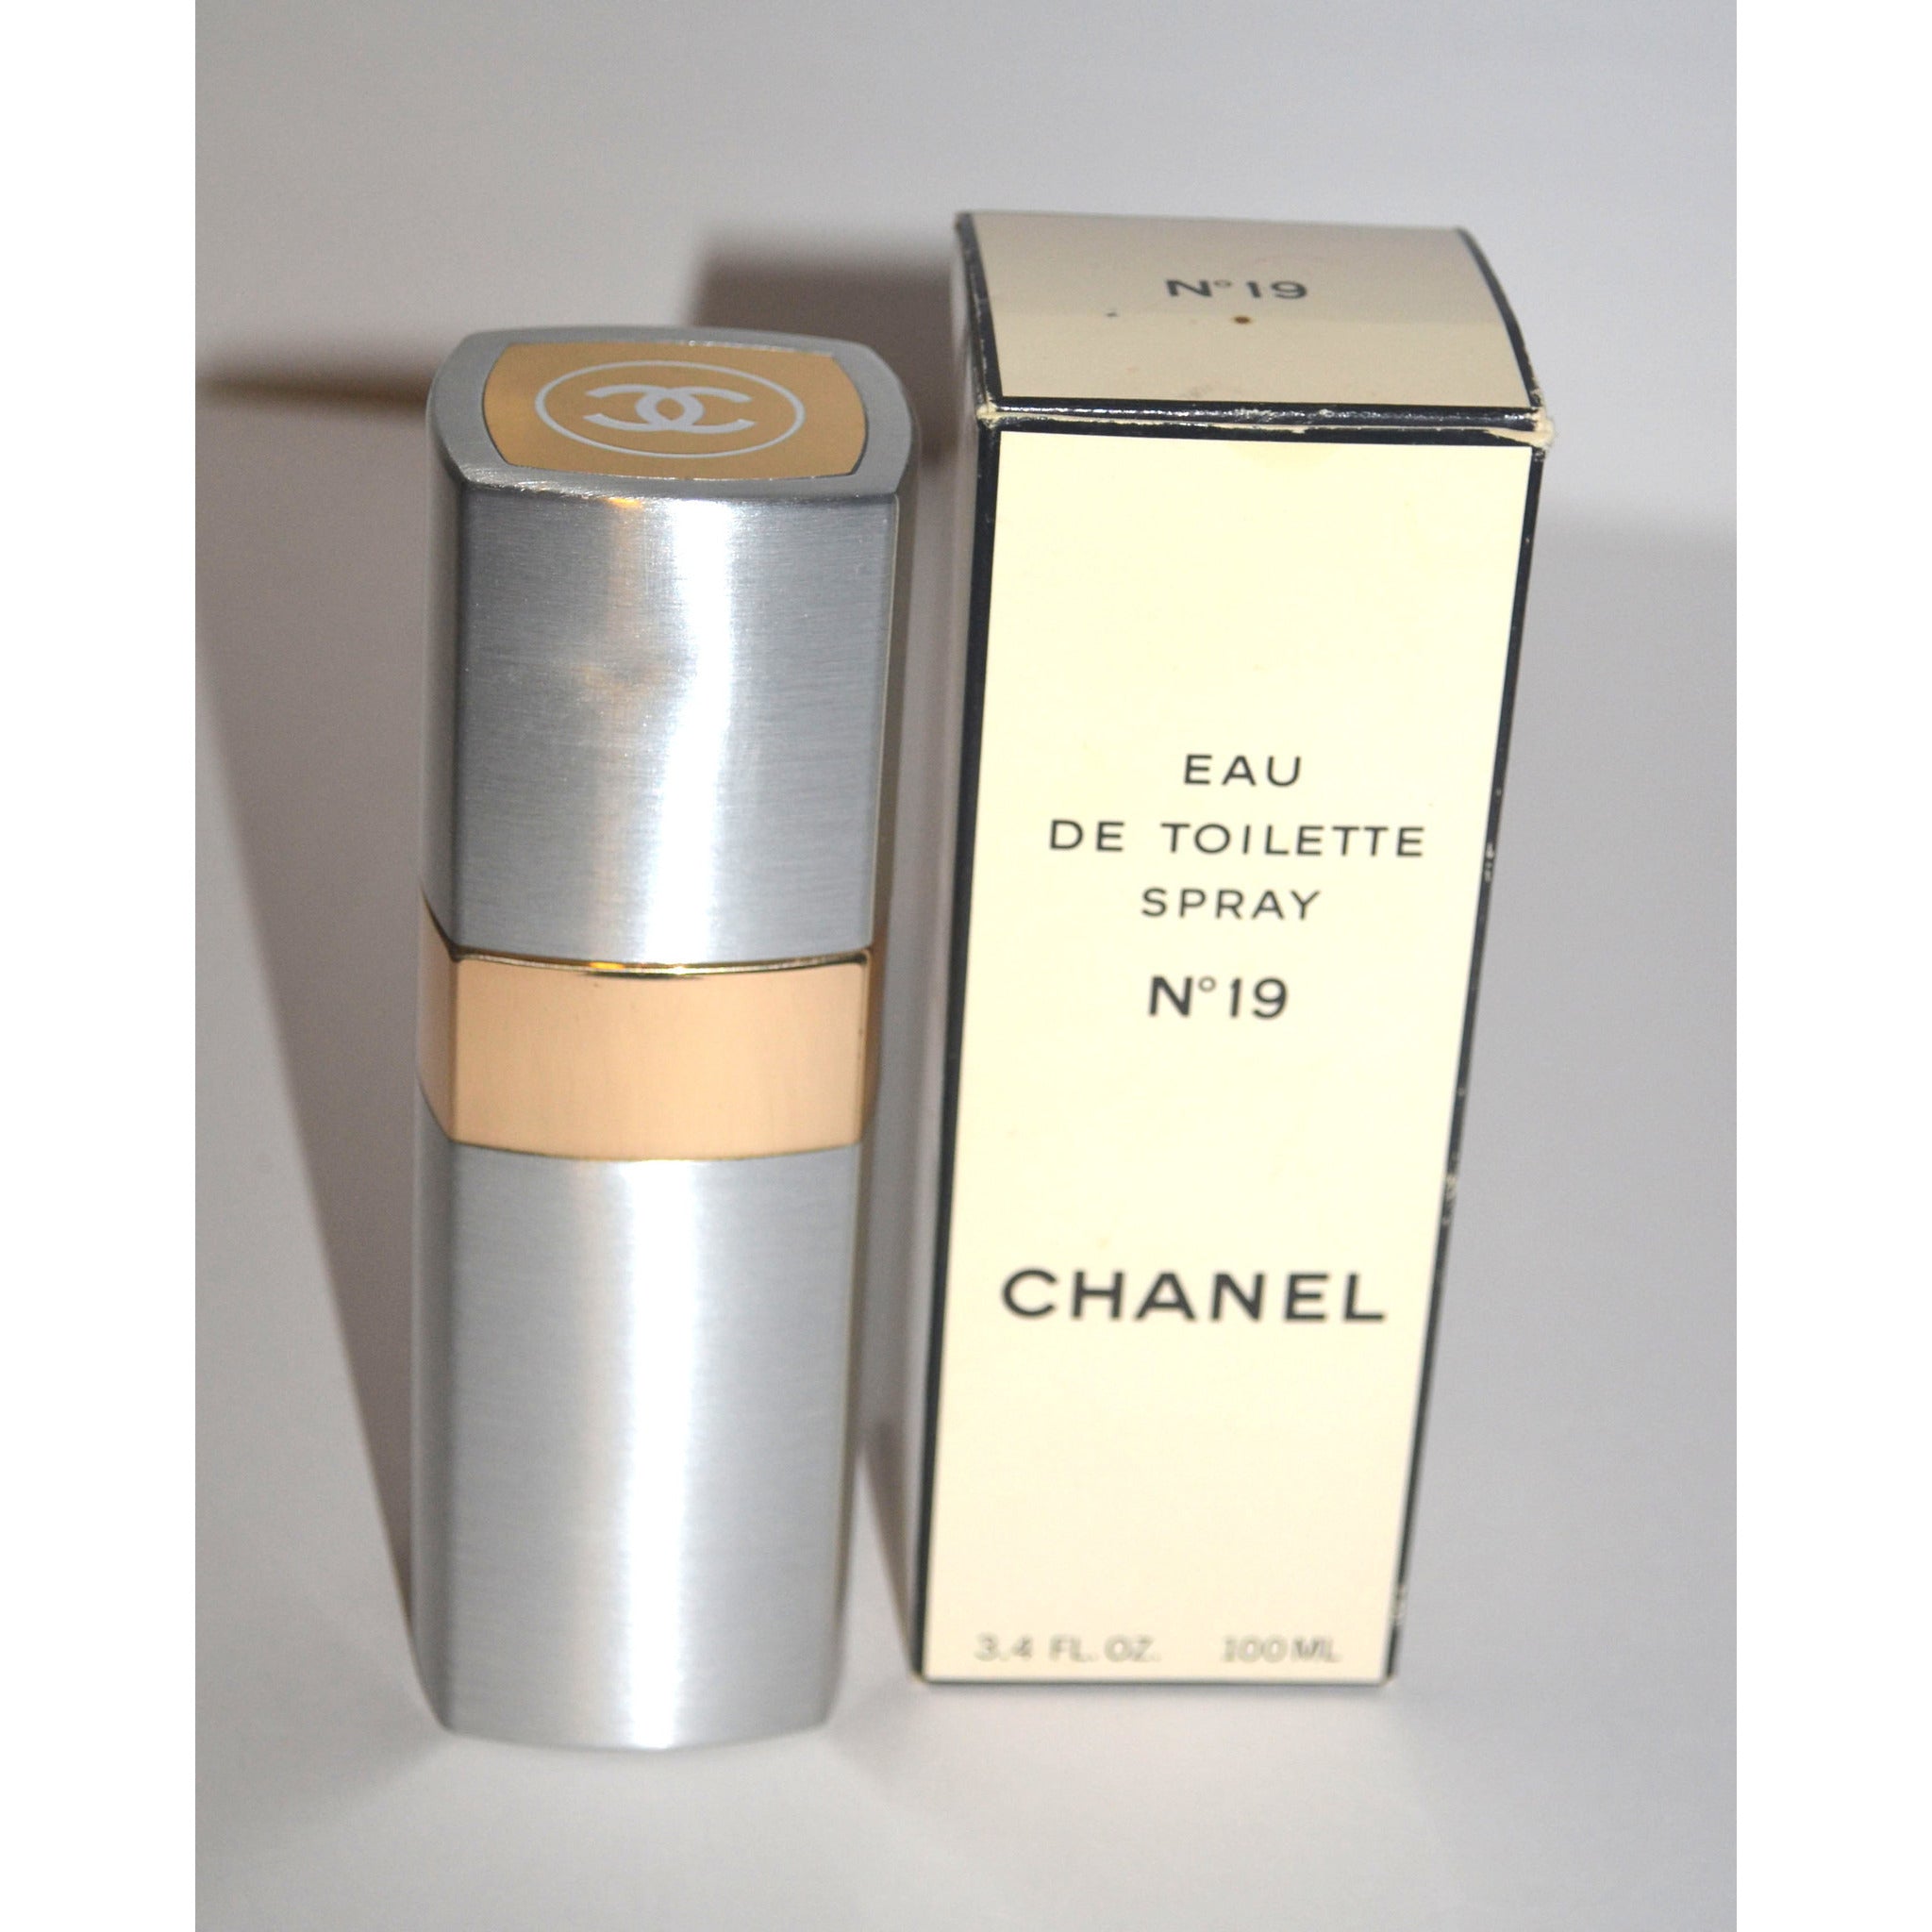 Chanel No 19 Eau De Toilette Spray Refillable Canister – Quirky Finds